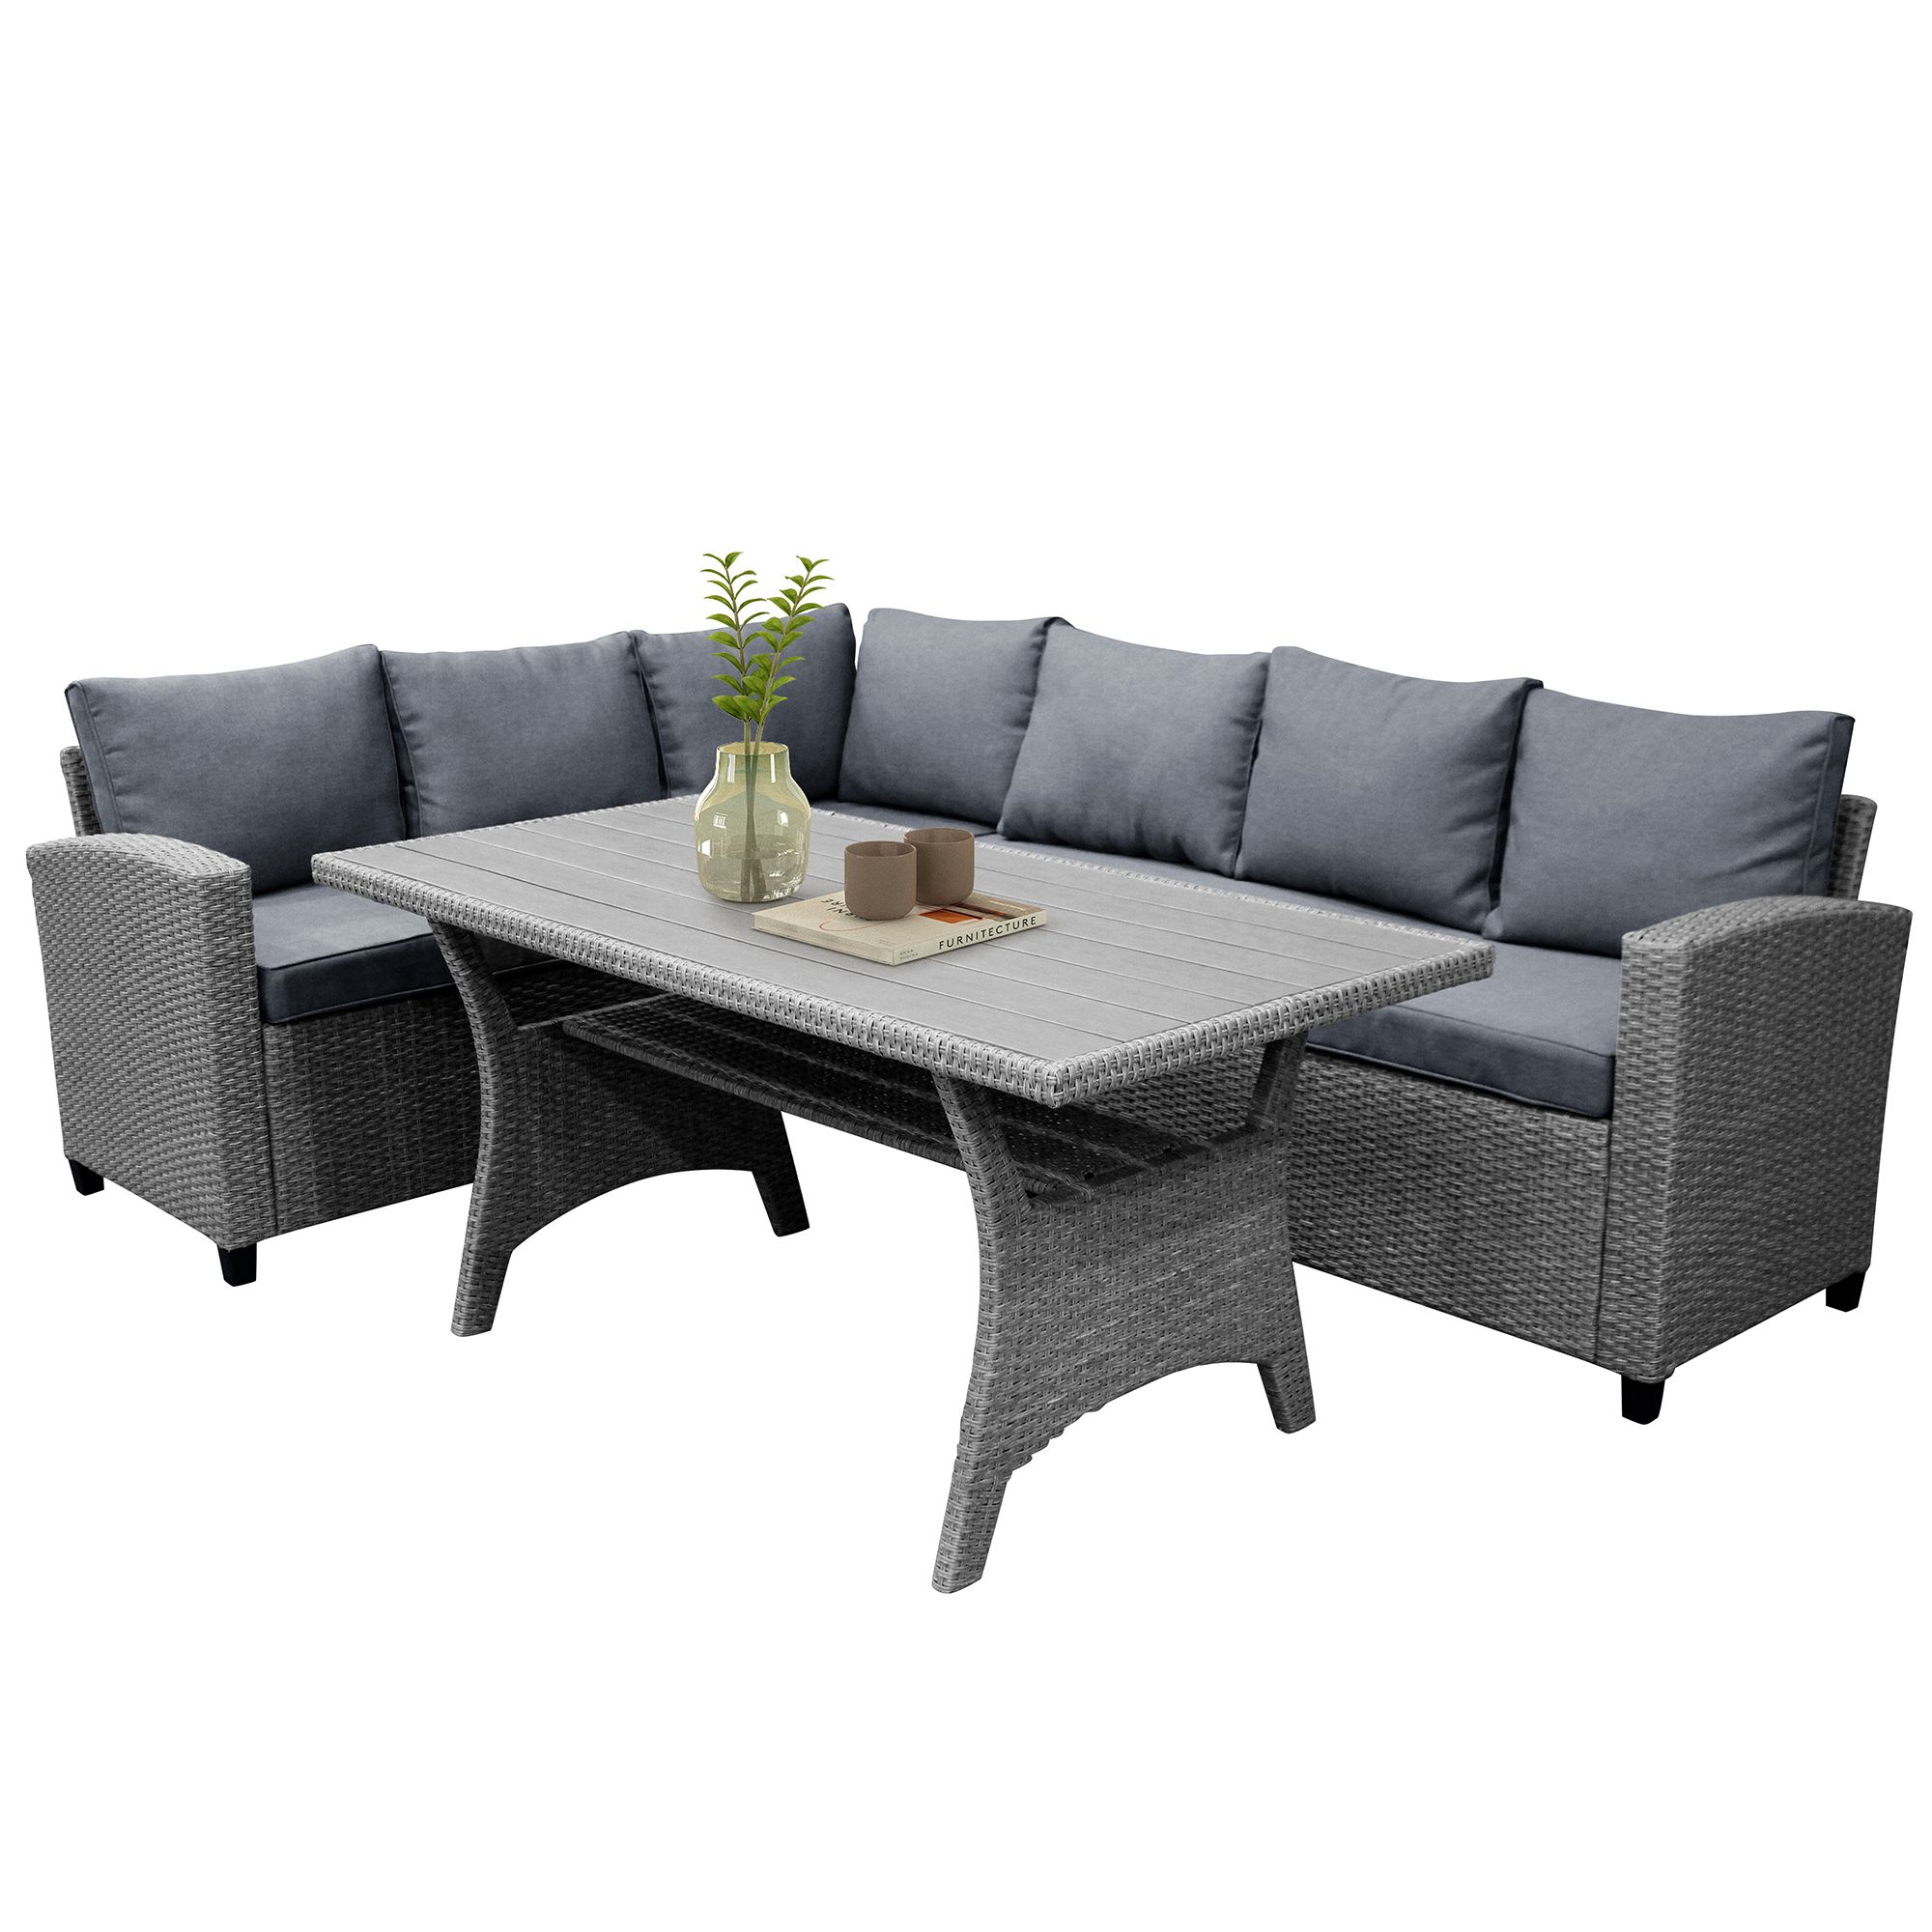 Outdoor Sectional Patio Conversation Set, Rattan Sofa Furniture Set With Regard To Outdoor Wicker Sectional Sofa Sets (View 12 of 15)